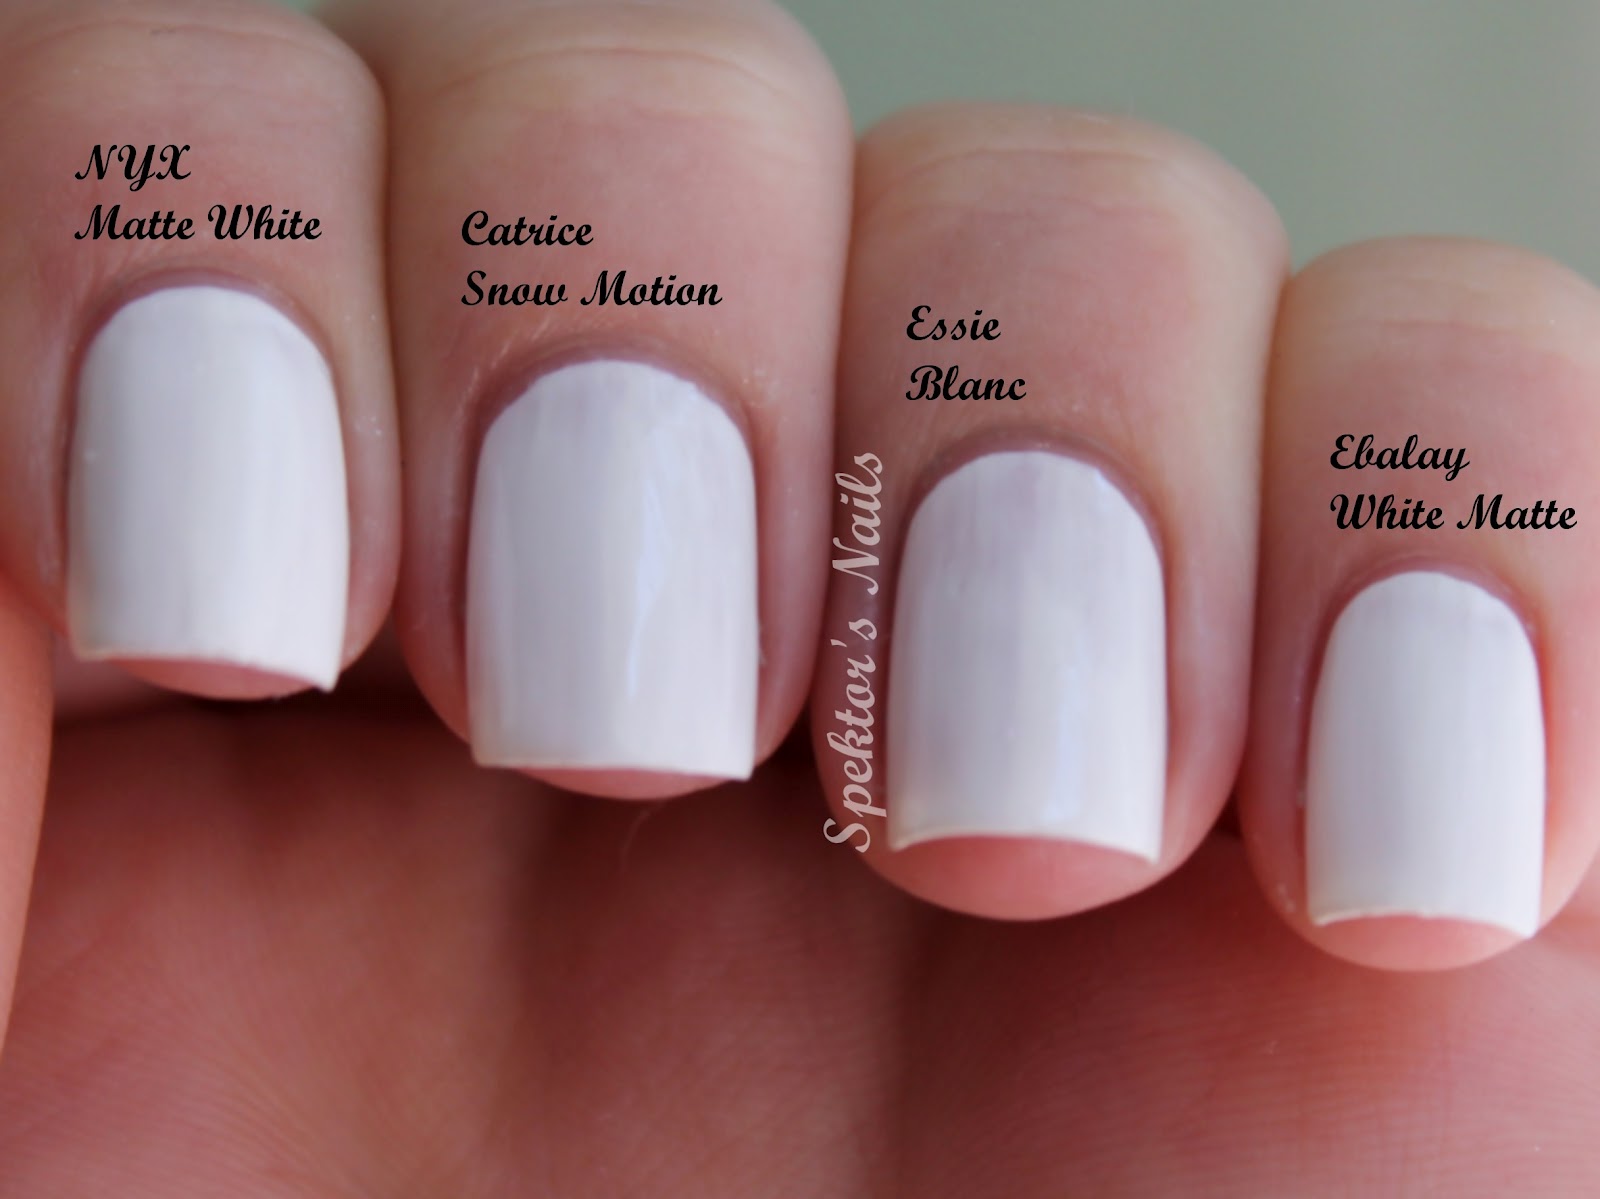 Best Off White Nail Polish Shades for Every Skin Tone - wide 9